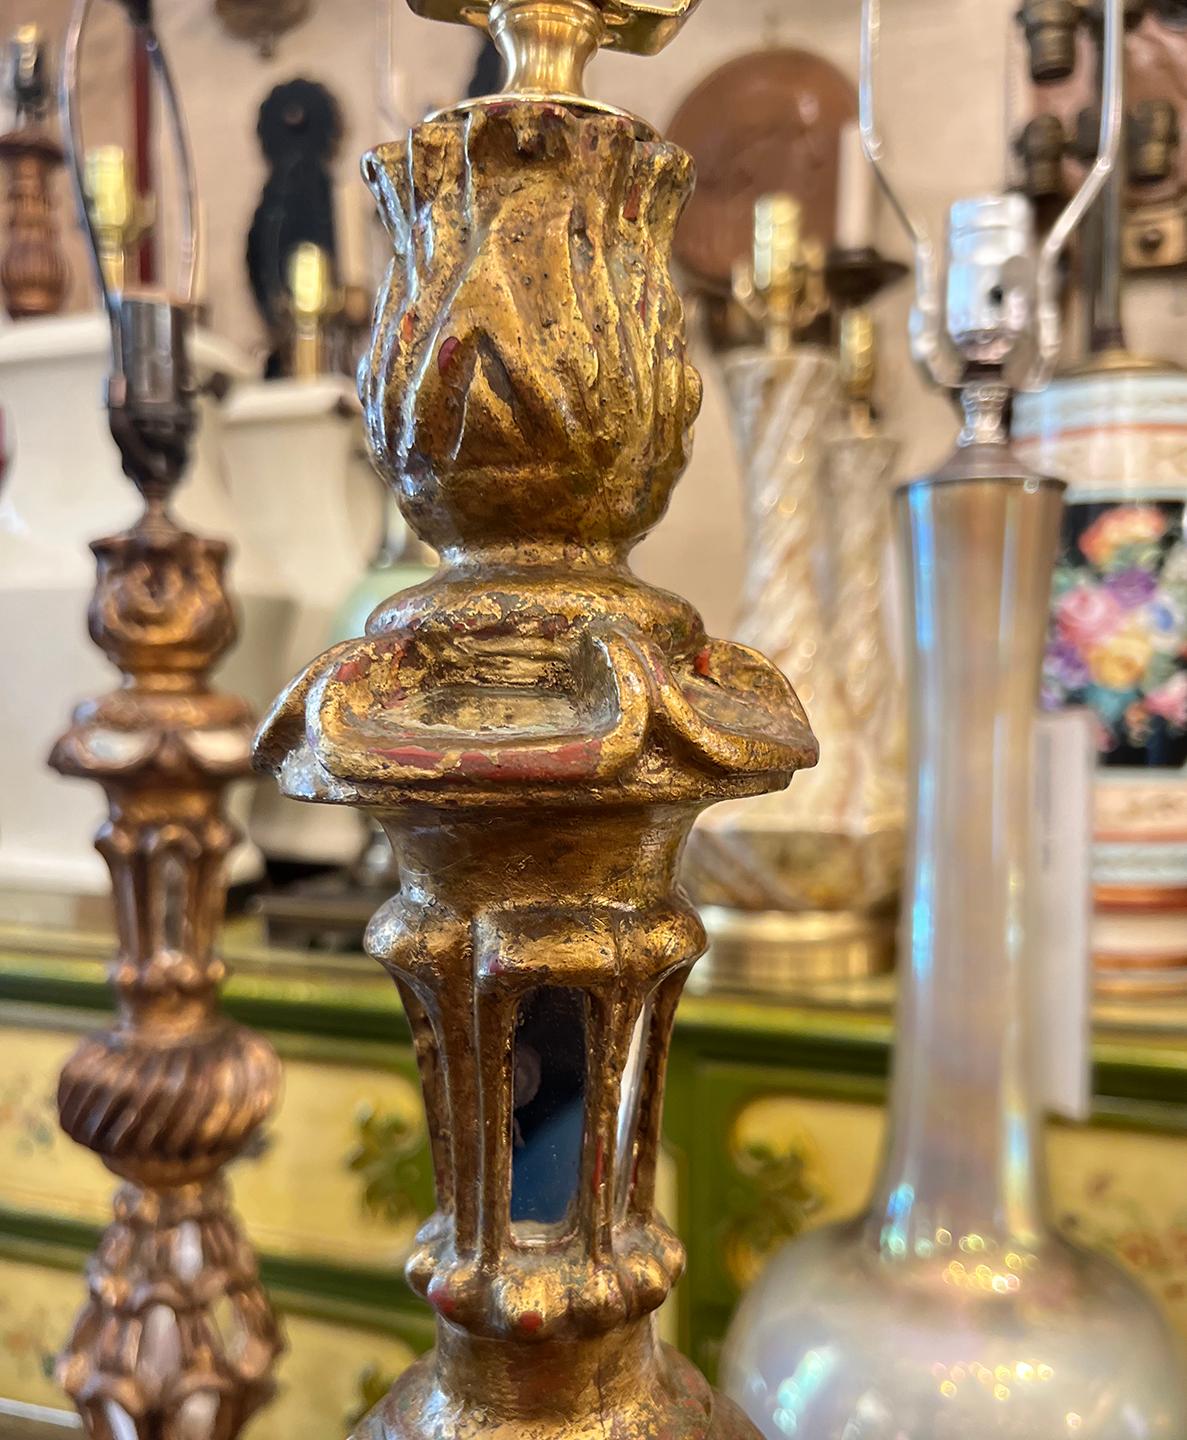 A circa 1920's Spanish candlestick lamp with mirror insets.

Measurements:
Height of body: 23″
Height to shade rest: 33.25″
Diameter (base): 8″